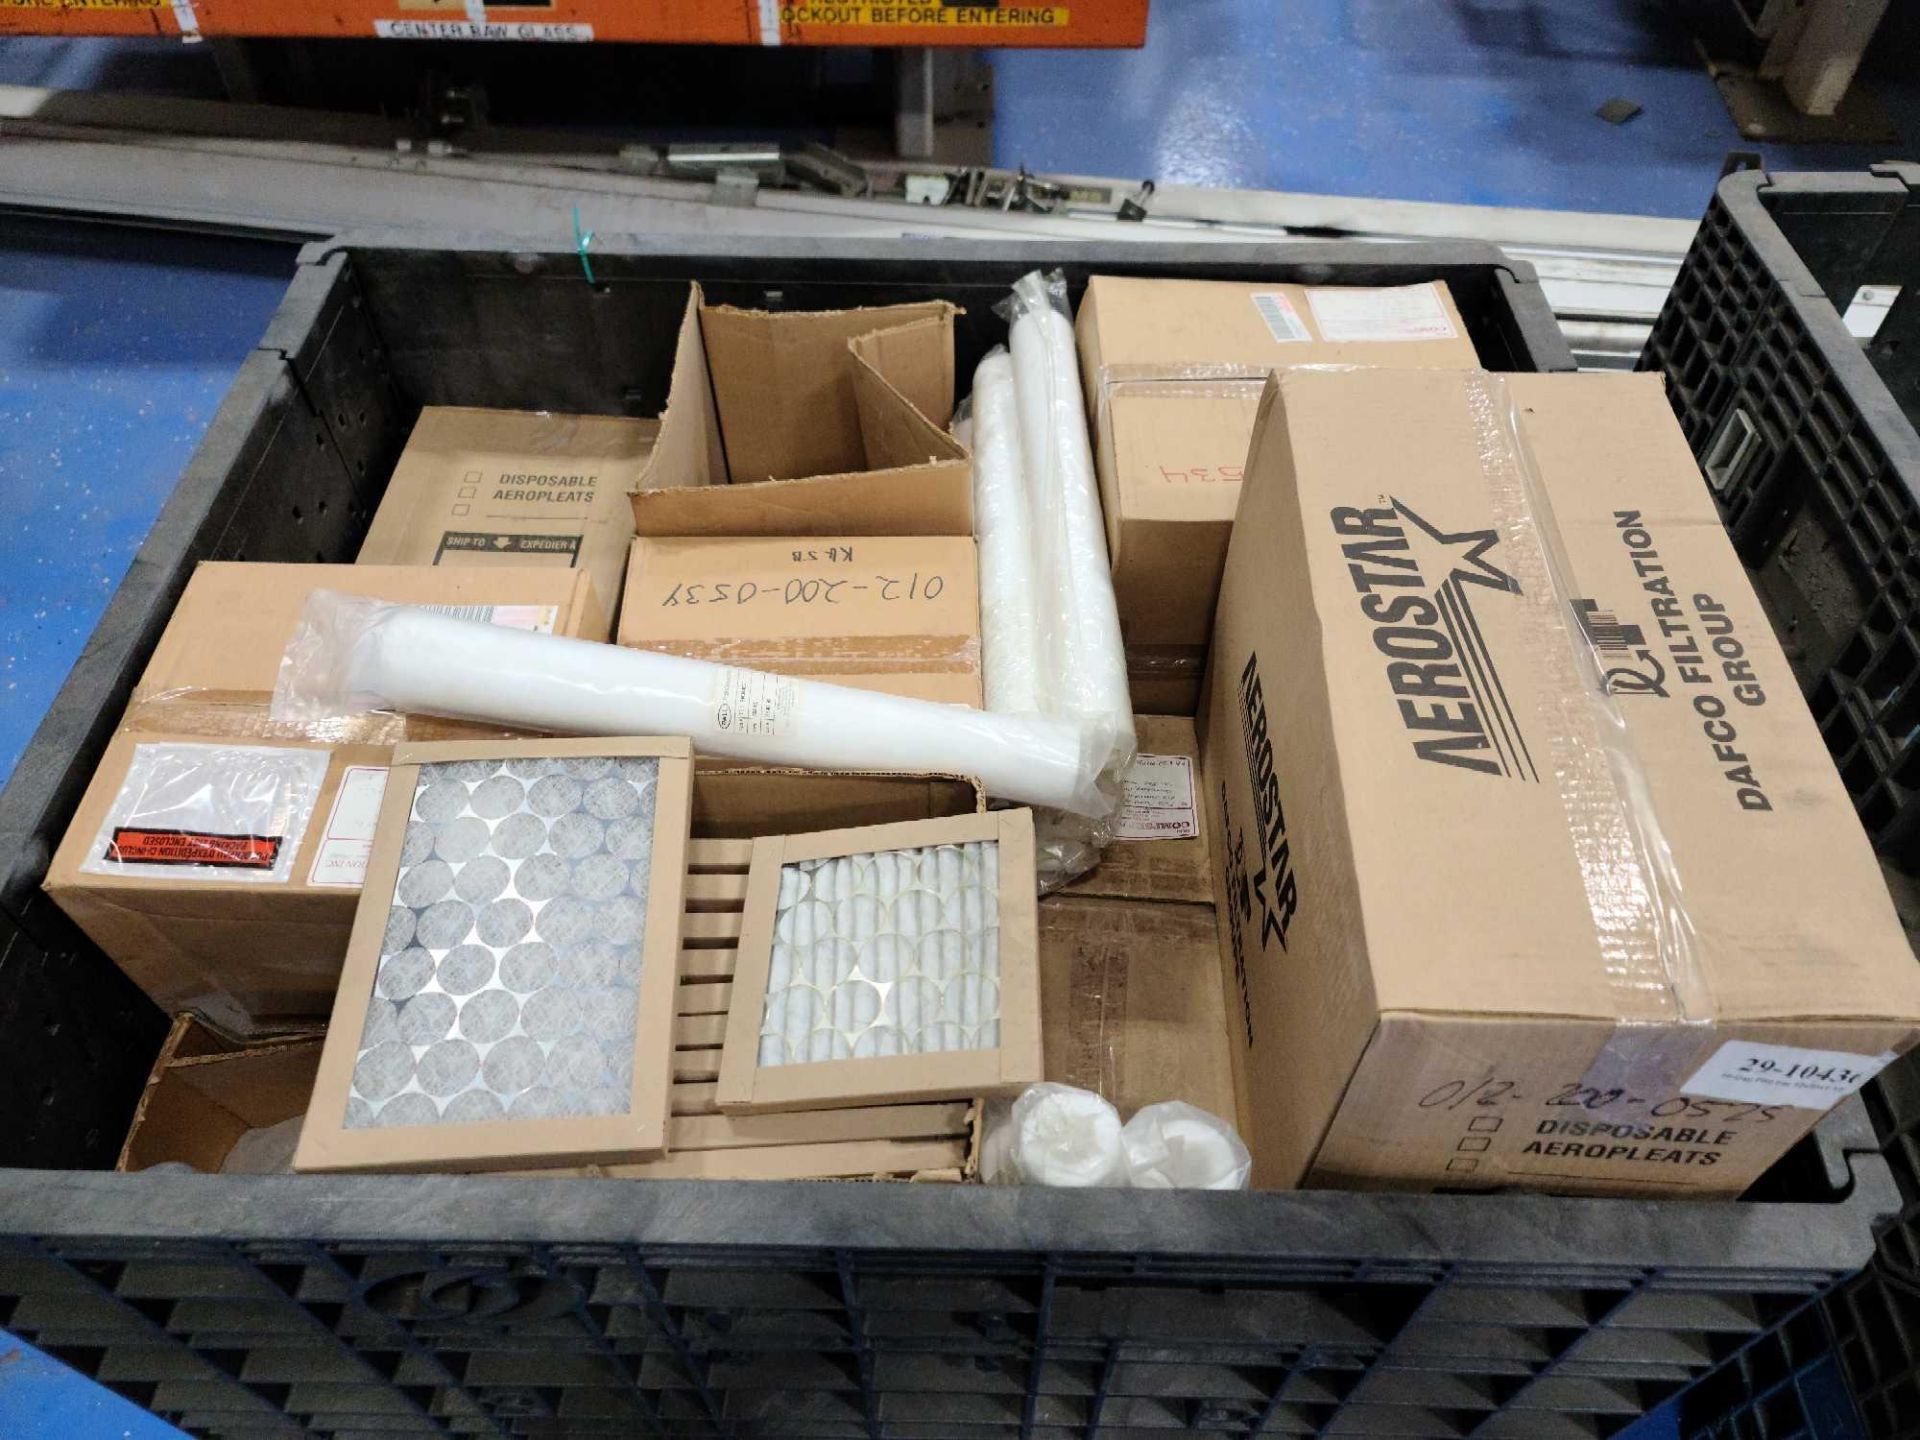 Crate of Various Air Filters - Aerostar, Compsep Filtration, and Pall